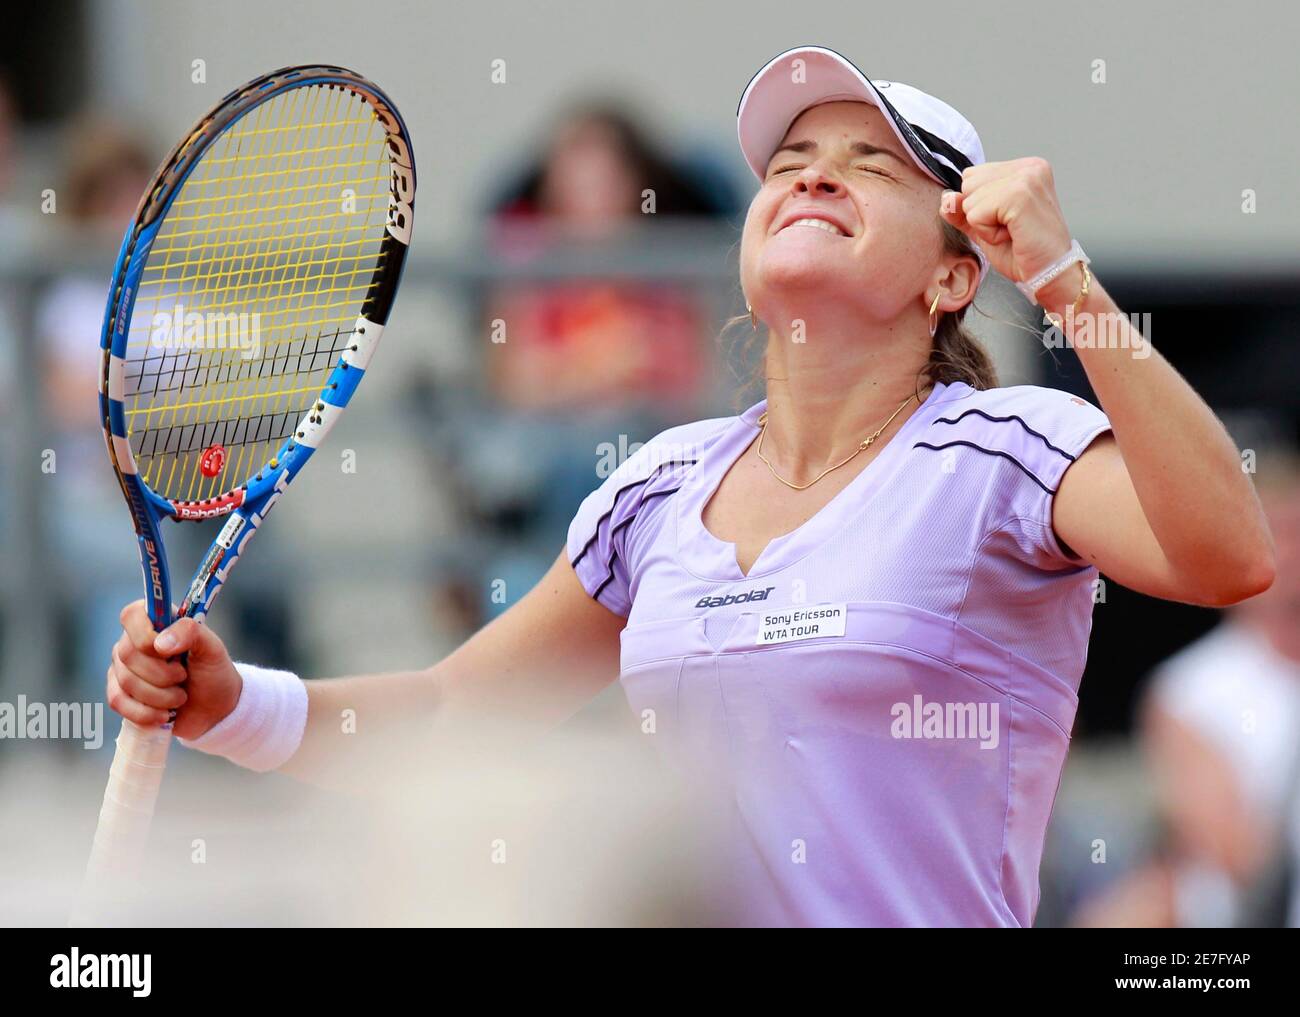 Romania's Alexandra Dulgheru celebrates winning against China's Zheng Jie  during the final match of the Warsaw Open tennis tournament May 22, 2010.  REUTERS/Peter Andrews (POLAND - Tags: SPORT TENNIS Stock Photo - Alamy